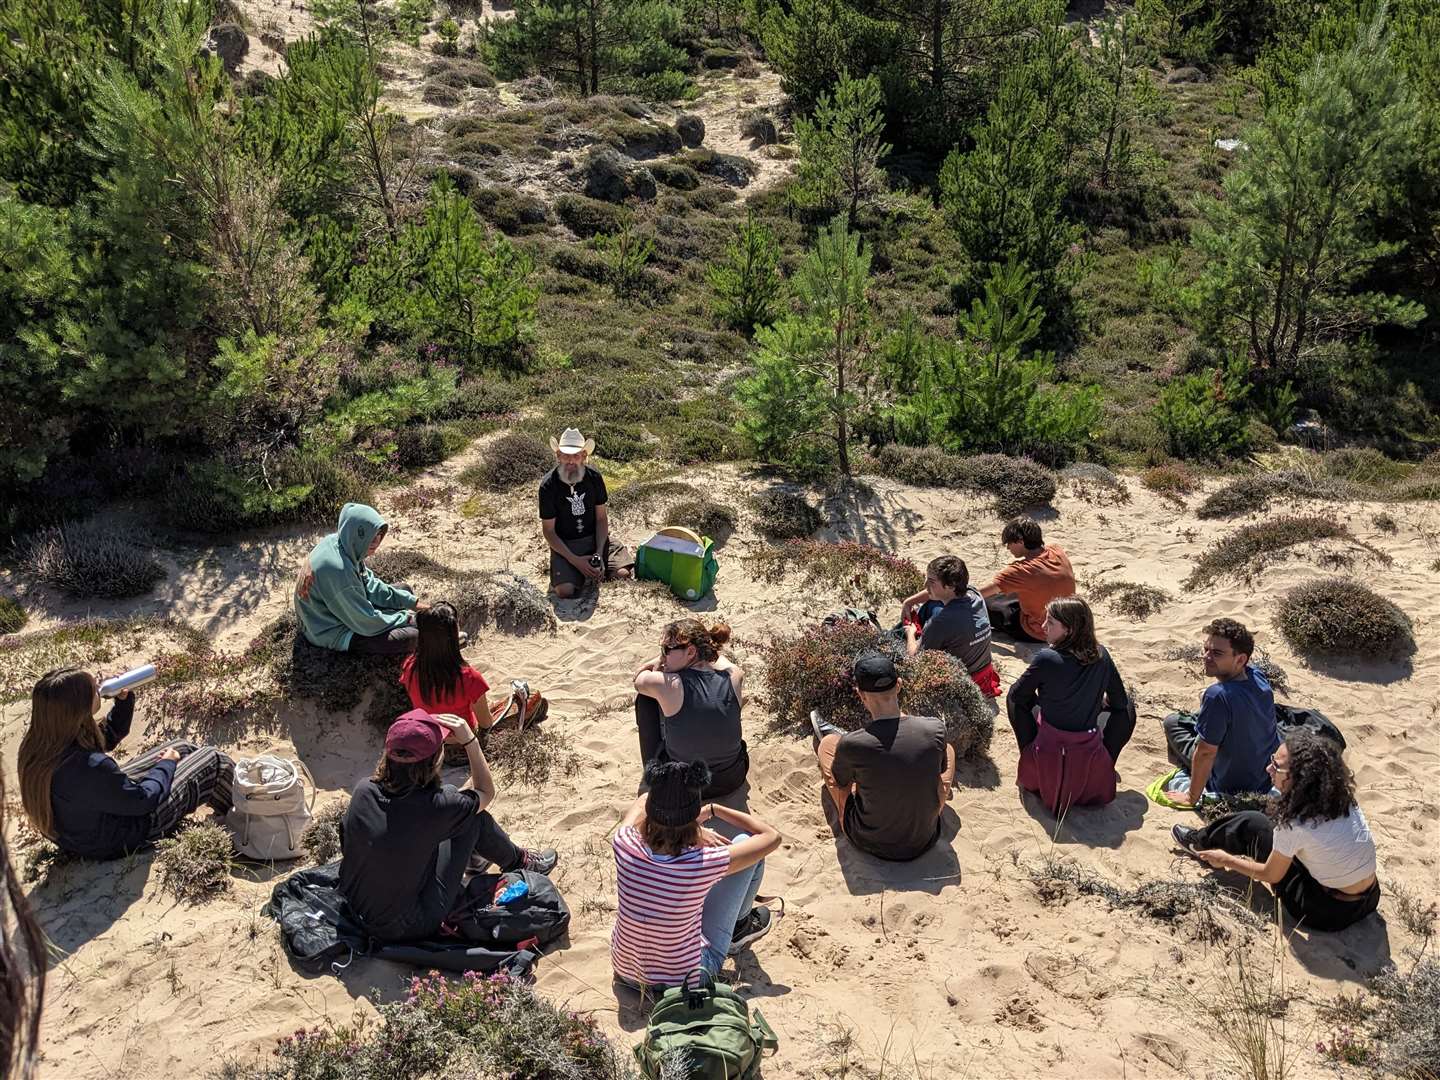 Moray Councillor and Climate Champion Dræyk van der Hørn encouraged attendees to draw on rocks in the dunes at Findhorn and develop a story using their imagination.